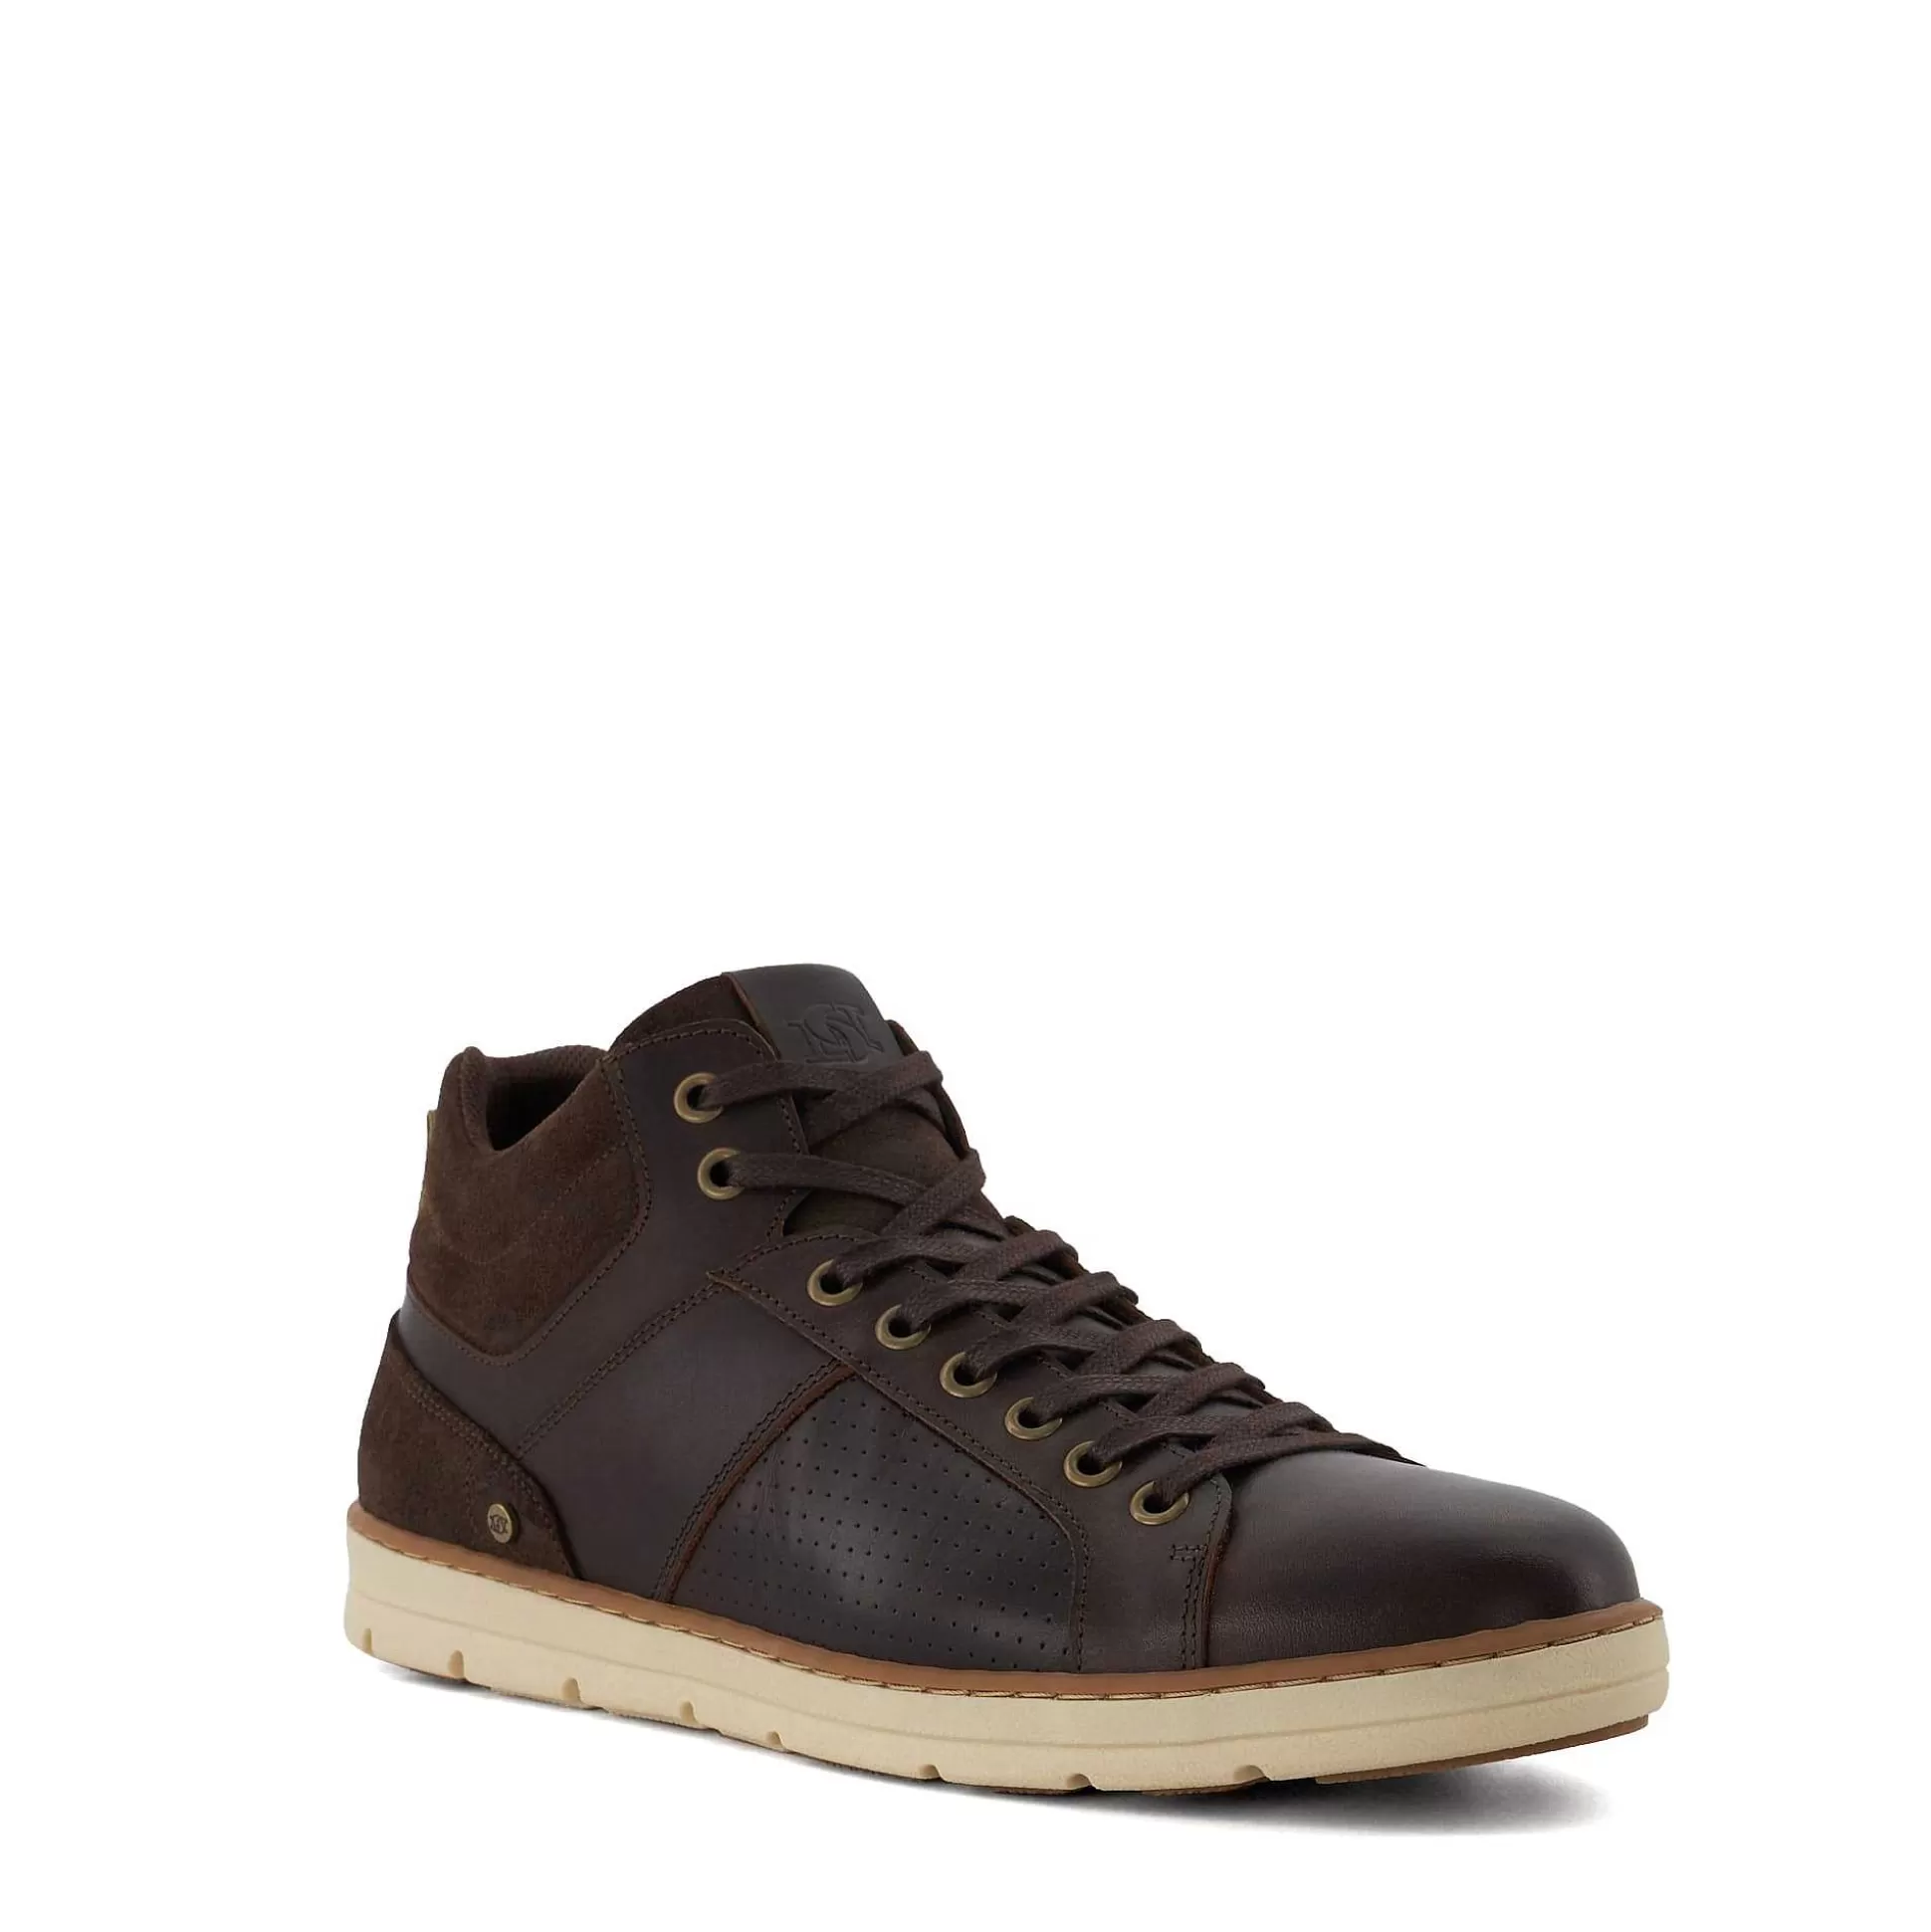 Dune London SOUTHERN - BROWN-Men Casual Shoes | Trainers